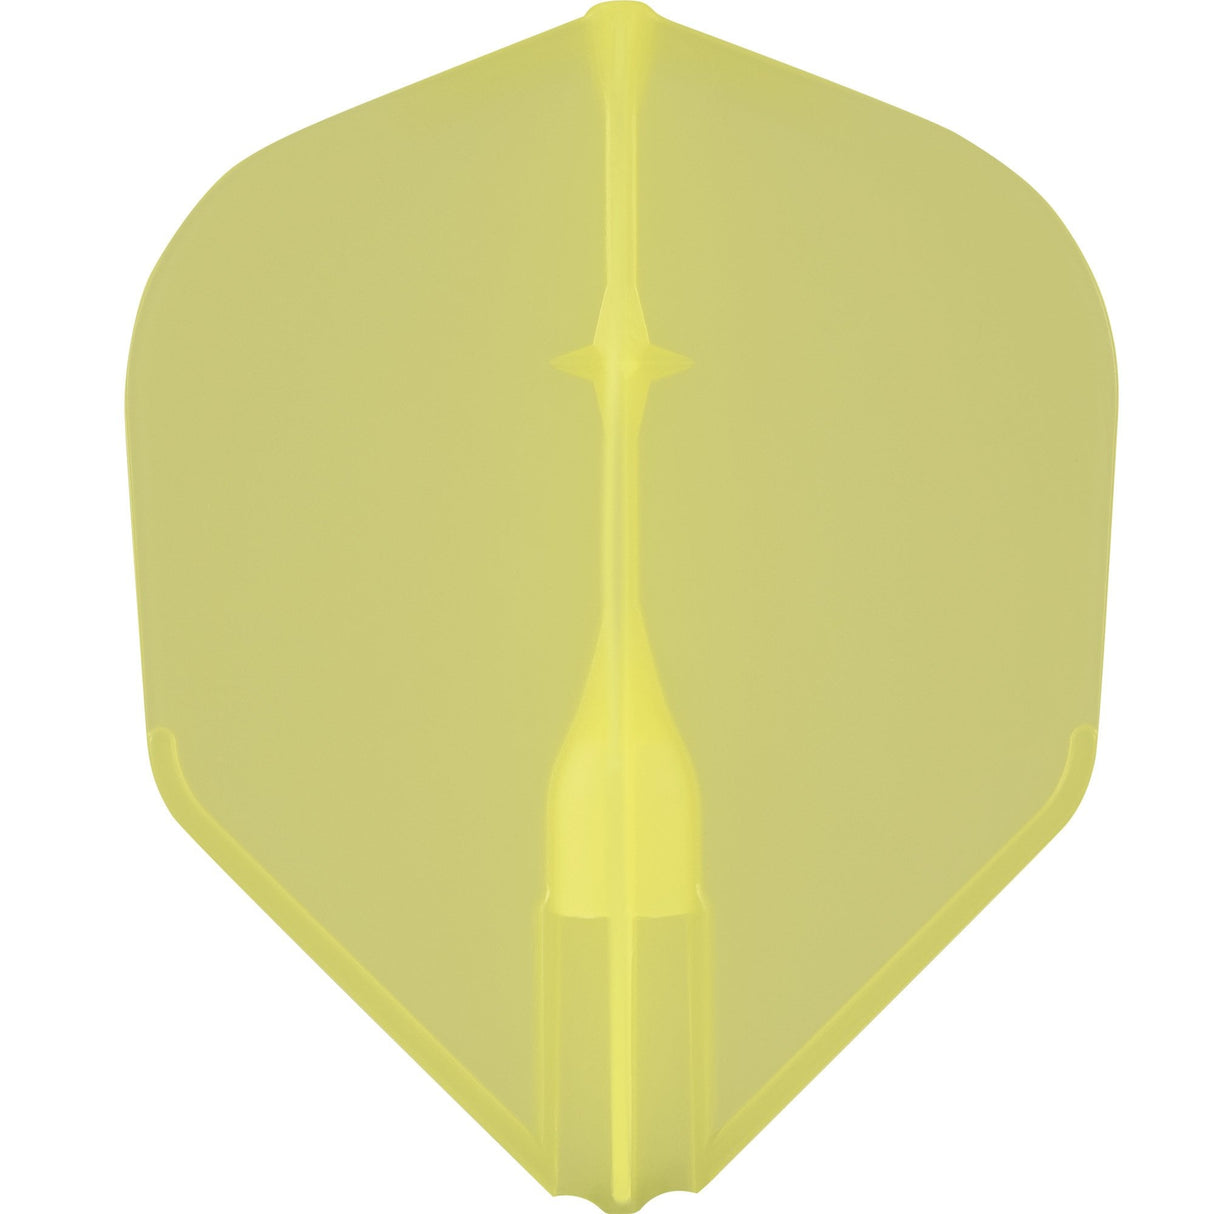 L-Style - EZ L-Flights - Integrated Champagne Ring - L3 Shape Yellow